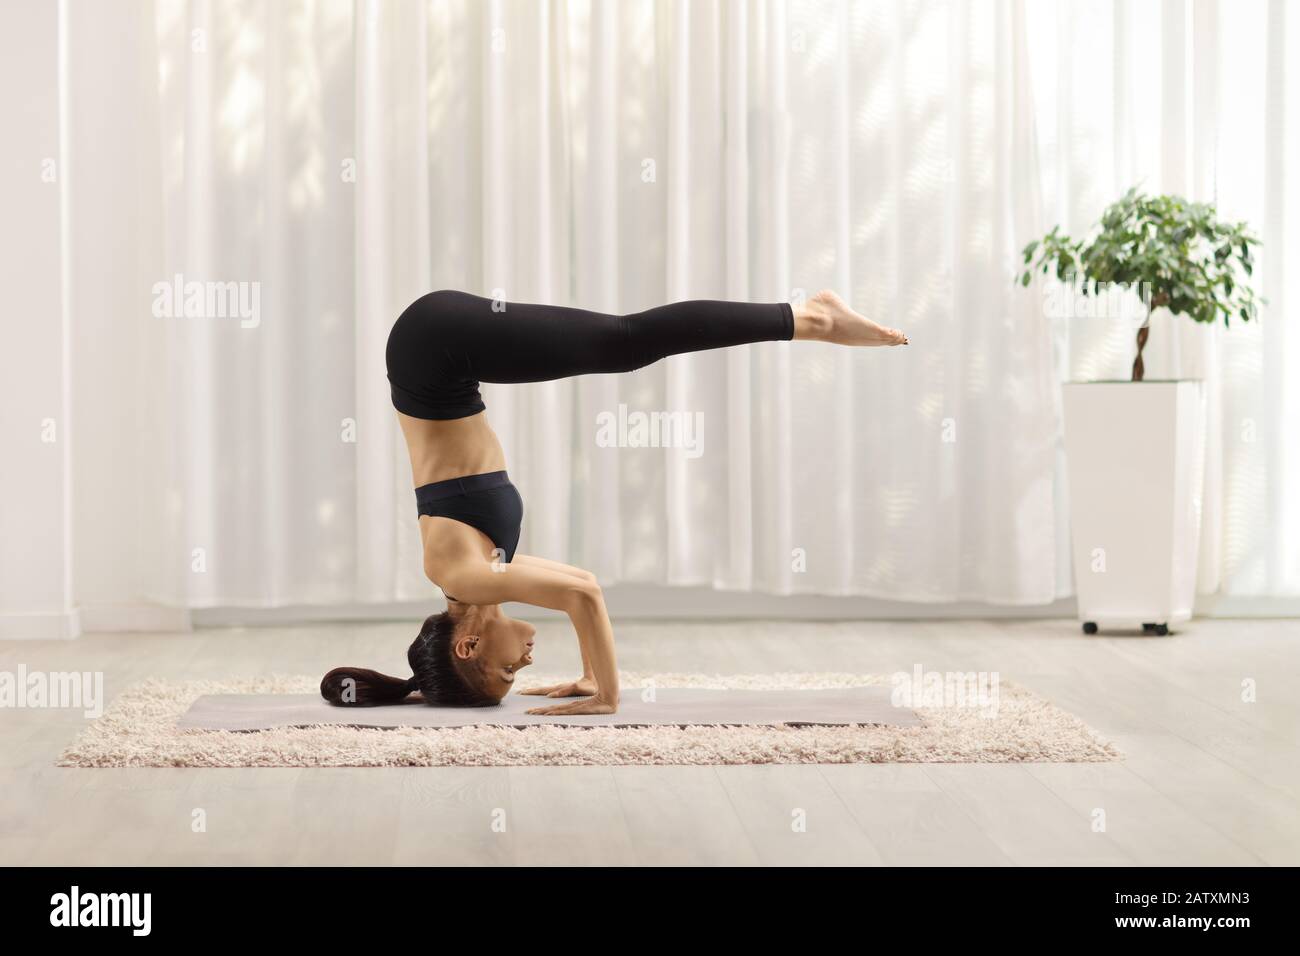 Woman in a yoga studio in a headstand pose - Stock Image - Everypixel